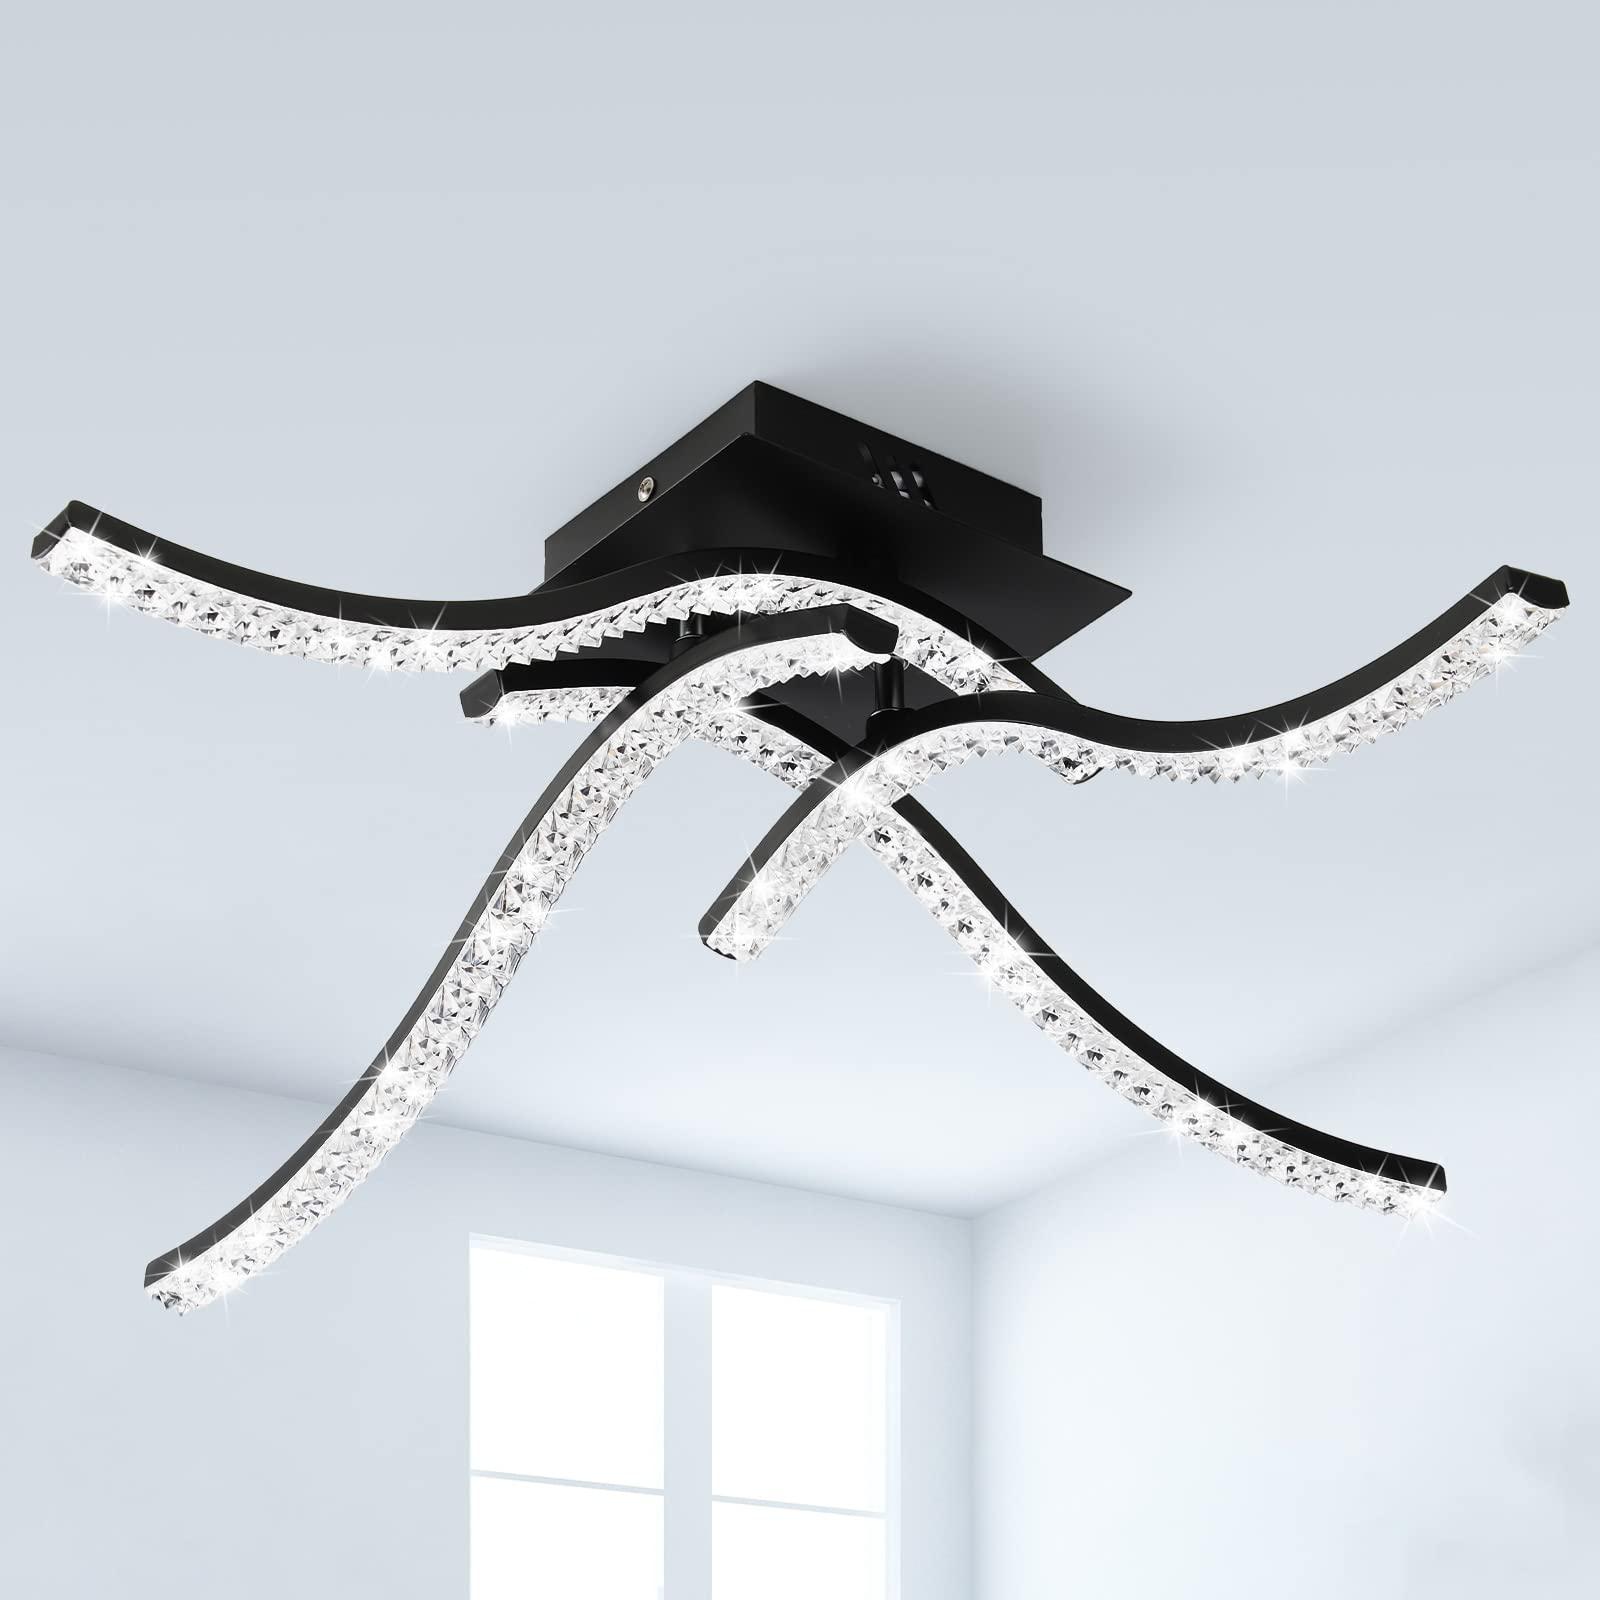 Zewanny Modern LED Ceiling Light,Acrylic Ceiling Lamps with 4 Built-in LED Boards,Elegant Curved Design 32W 3520LM,Ceiling Fixture for Dining Room Living Room Bedroom Kitchen Hallway